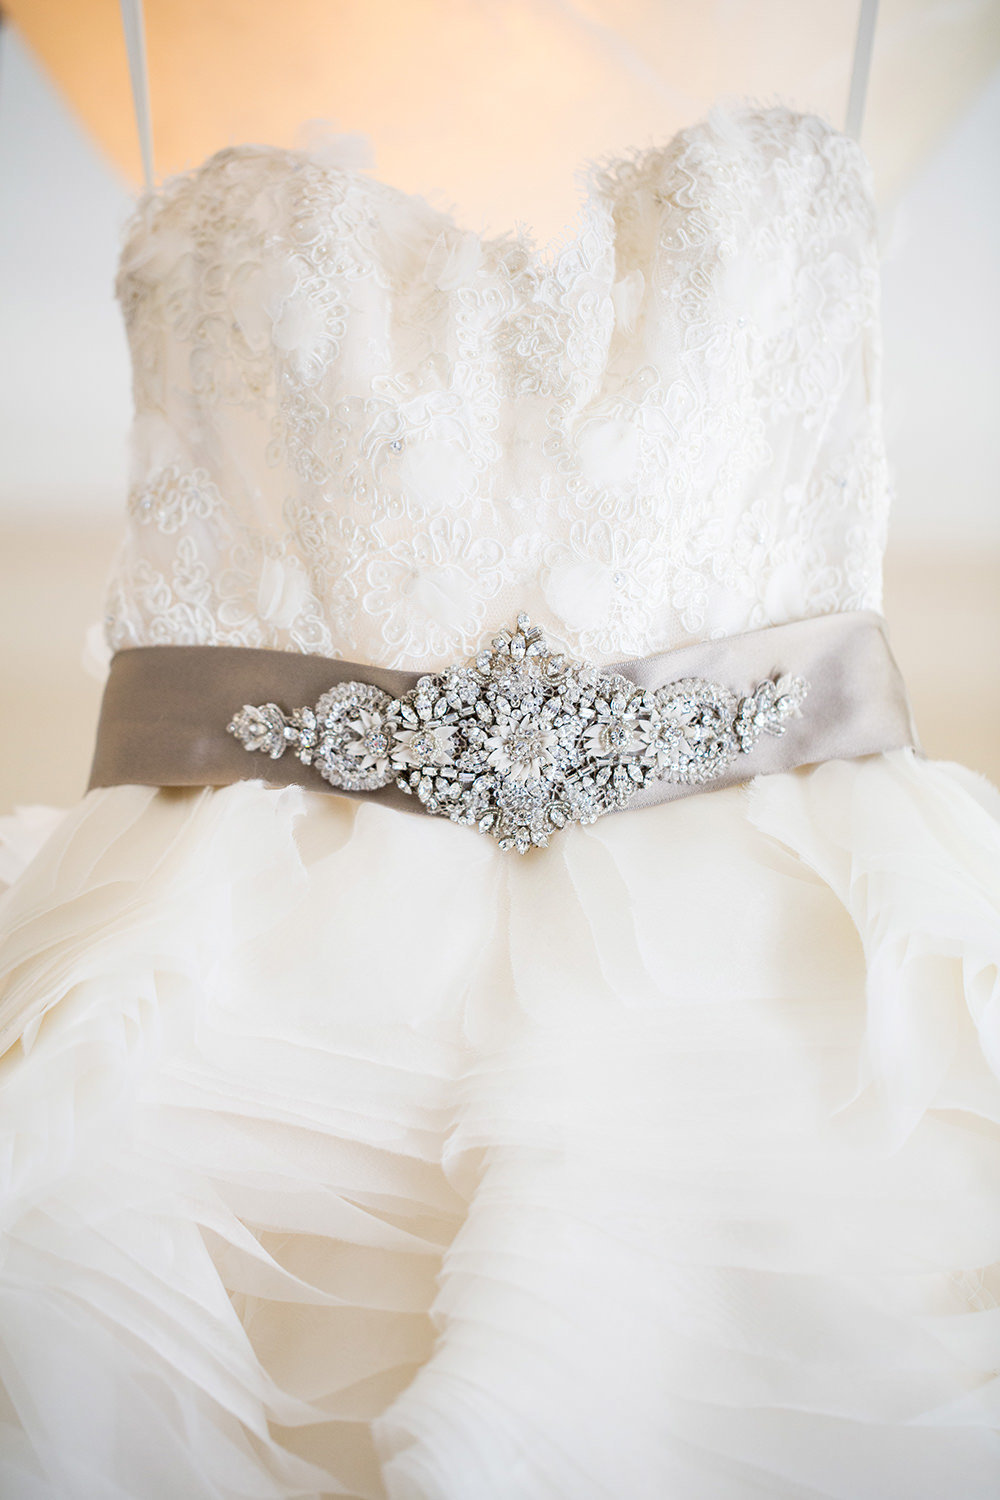 Wedding dress with lace and rhinestones